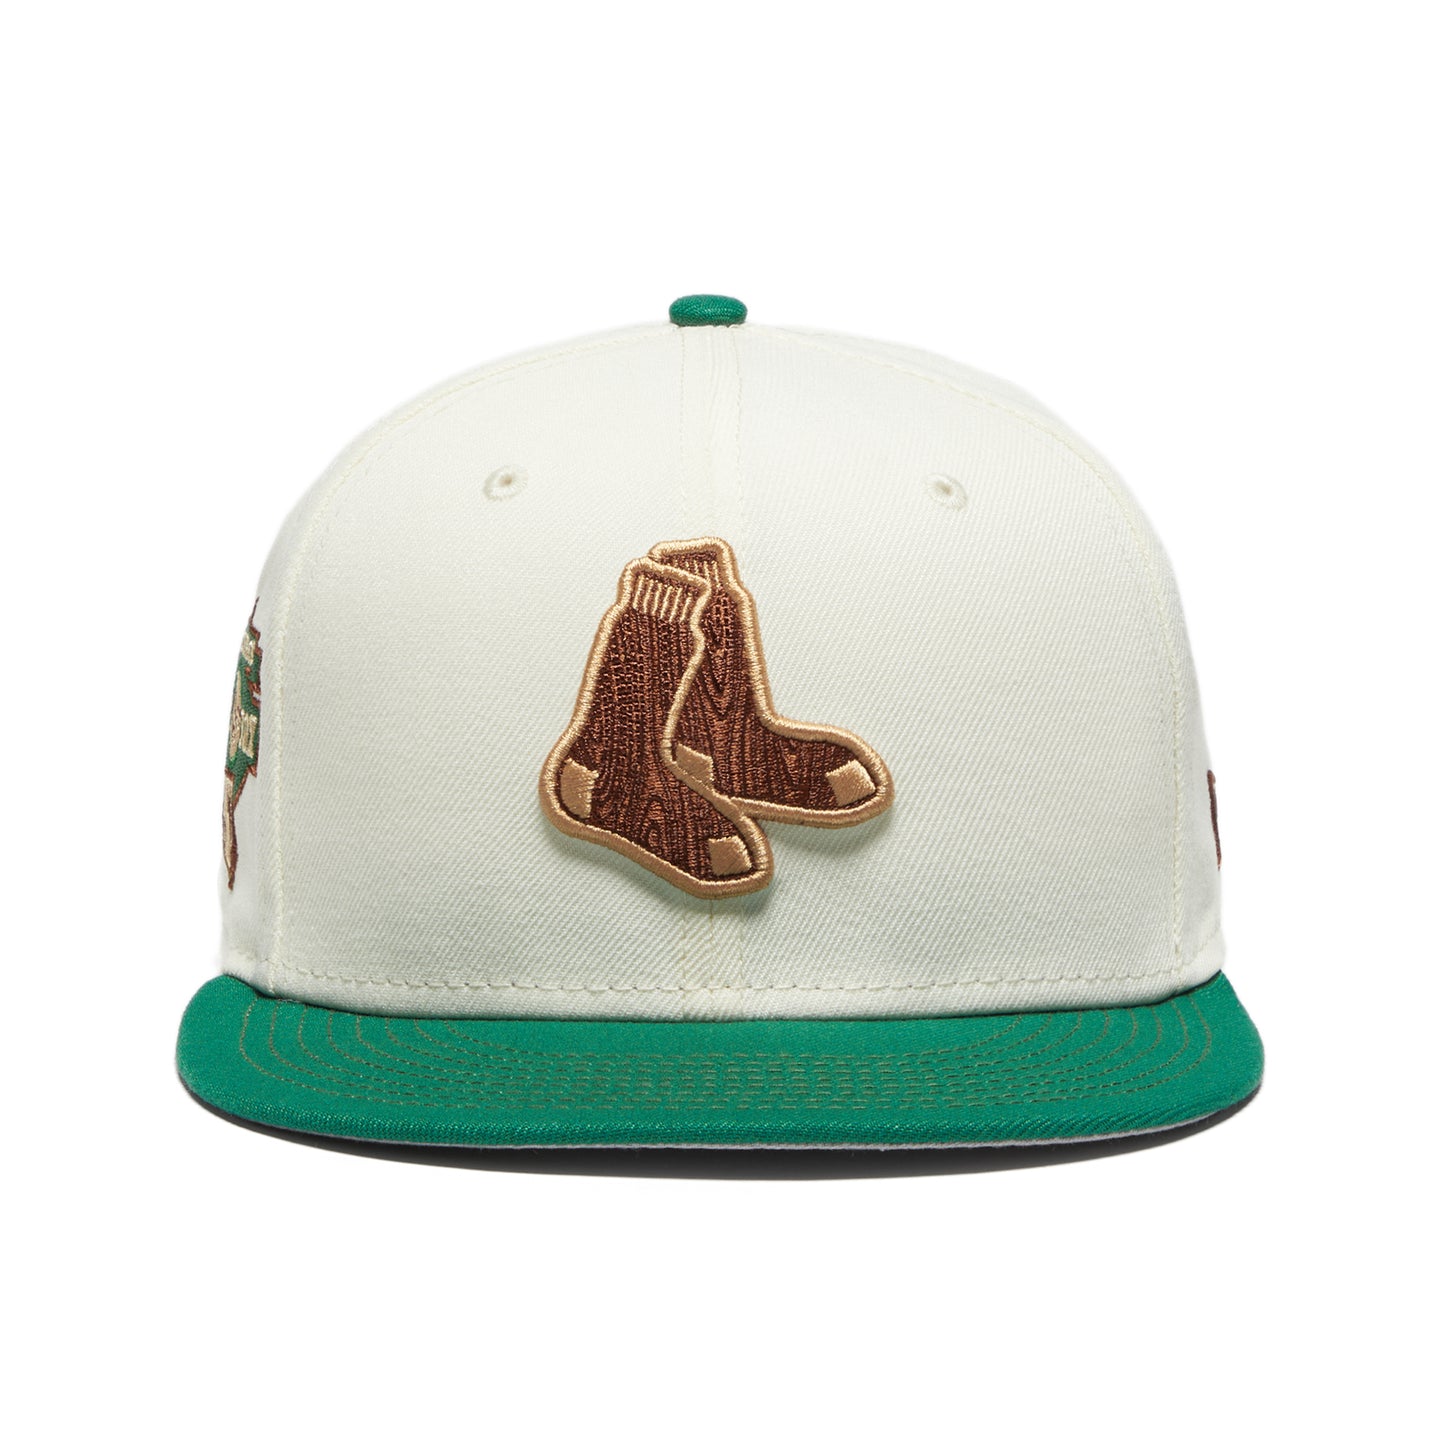 New Era Boston Red Sox 59Fifty Fitted Hat (White/Green)